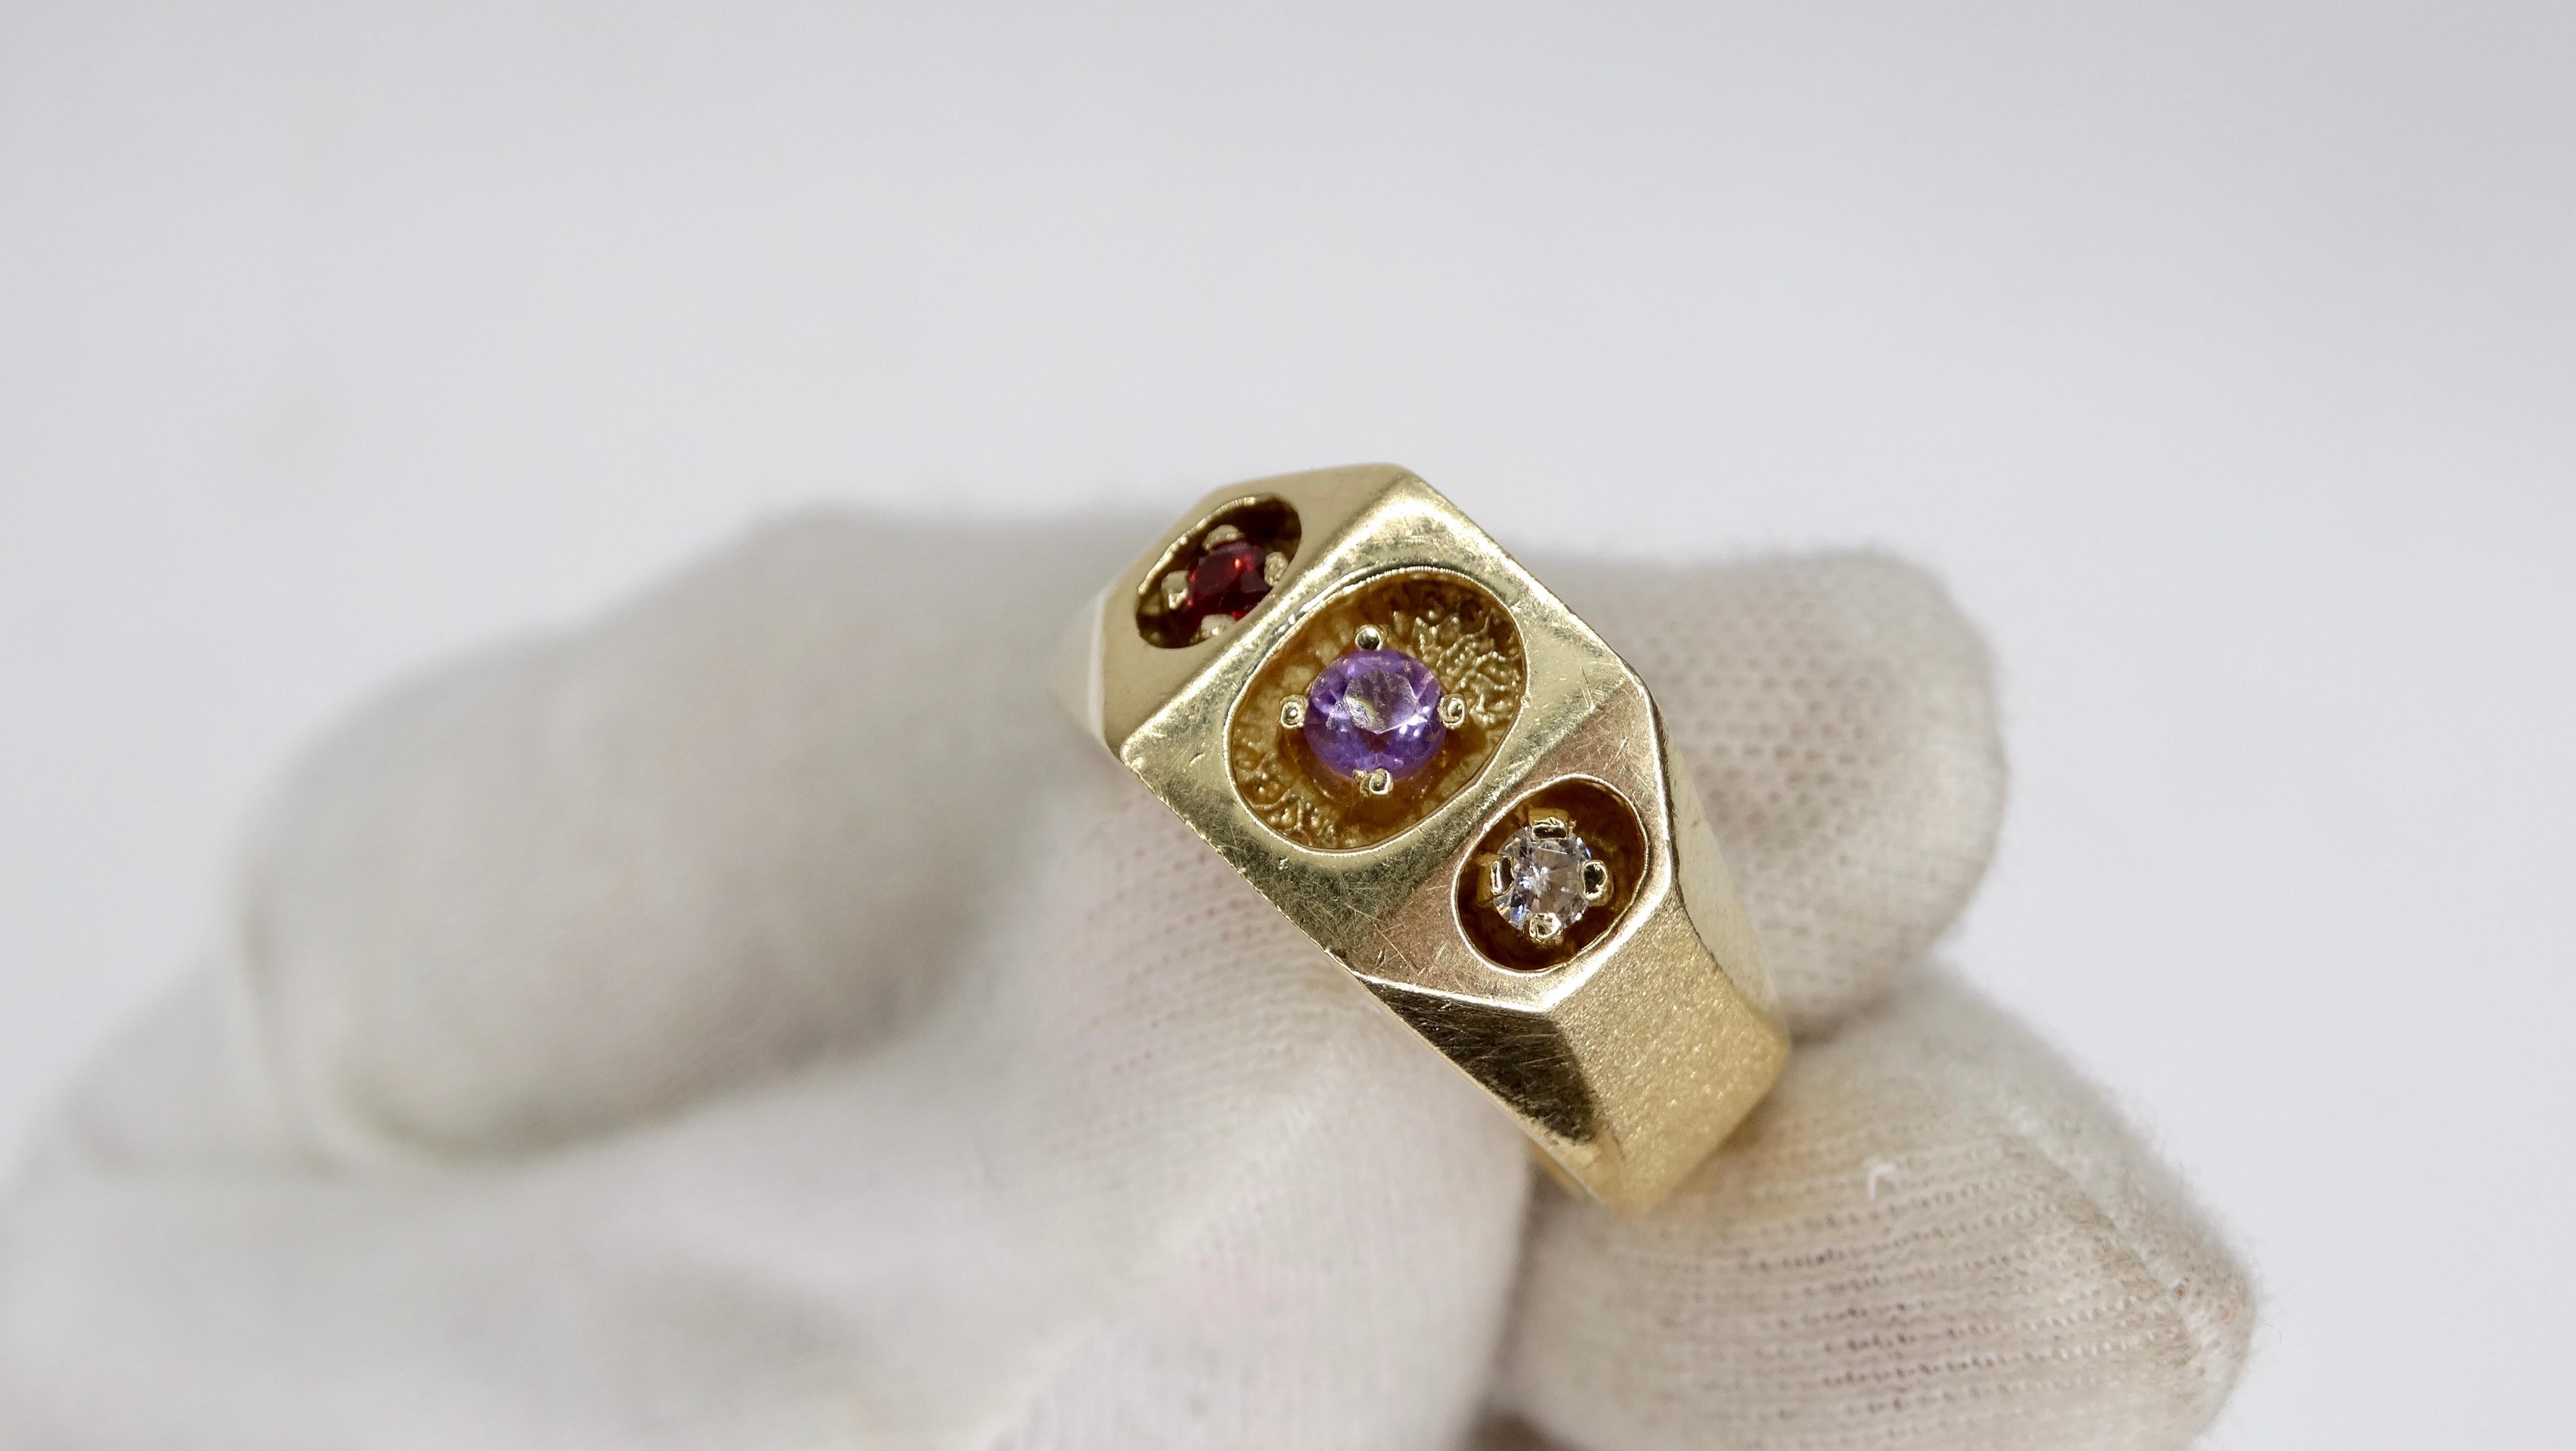 Beautiful 14k Gold ring from the late 20th century featuring a thick band with a round cut Ruby, Amethyst and Diamond in a caved in circular prong setting. Ring is a size 9 and weighs 11.5g total. Perfect to wear for a night out with your favorite